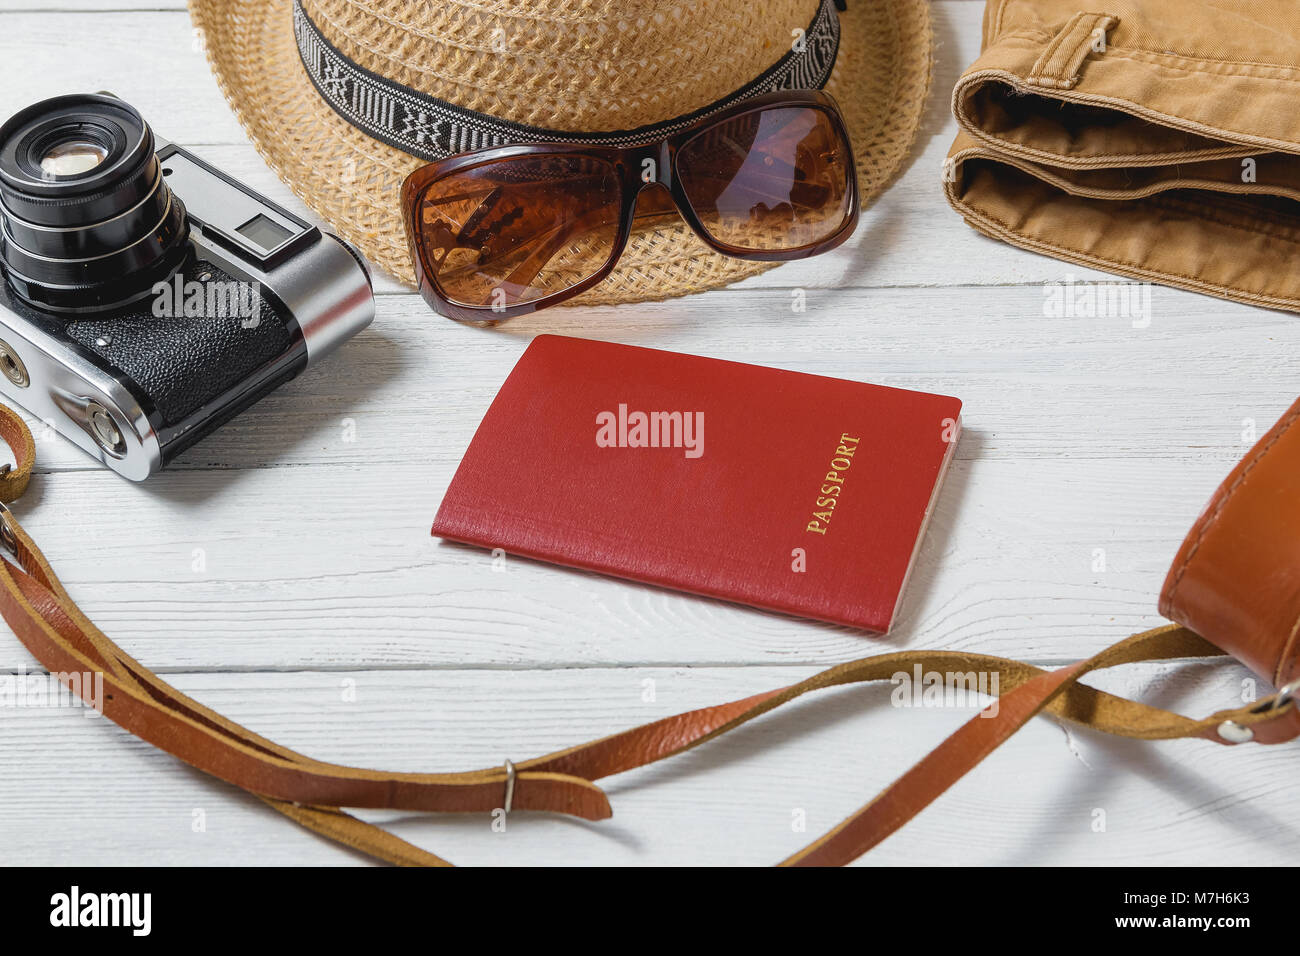 Traveler Items Vacation Travel Accessories Holiday Long Weekend Travelling Stuff Equipment Background Concept Stock Photo